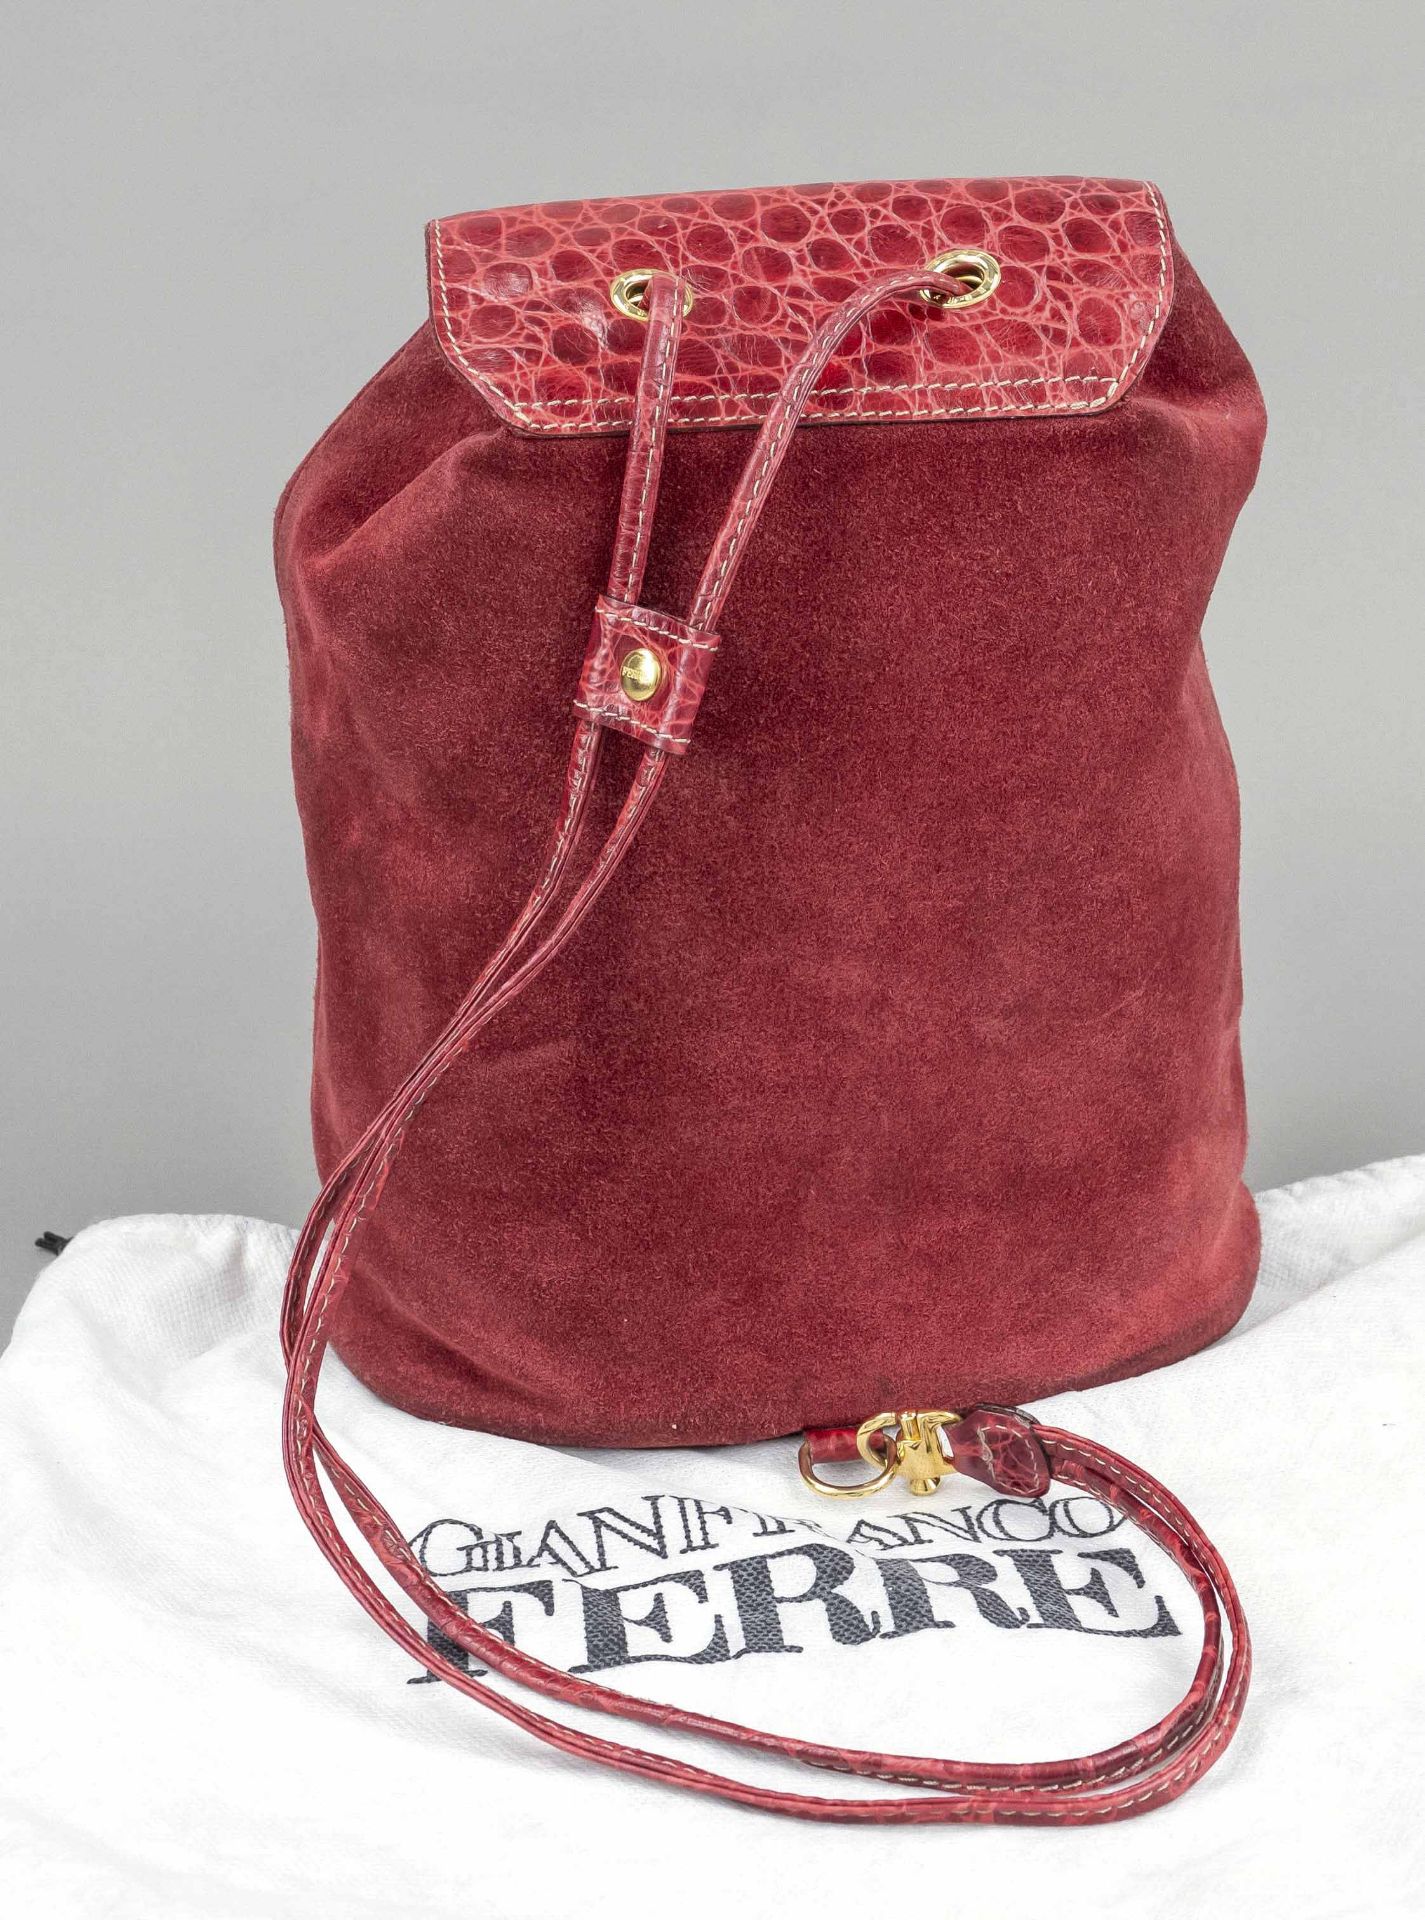 Gianfranco Ferré, small vintage backpack, burgundy suede with details in smooth leather of the - Image 2 of 2